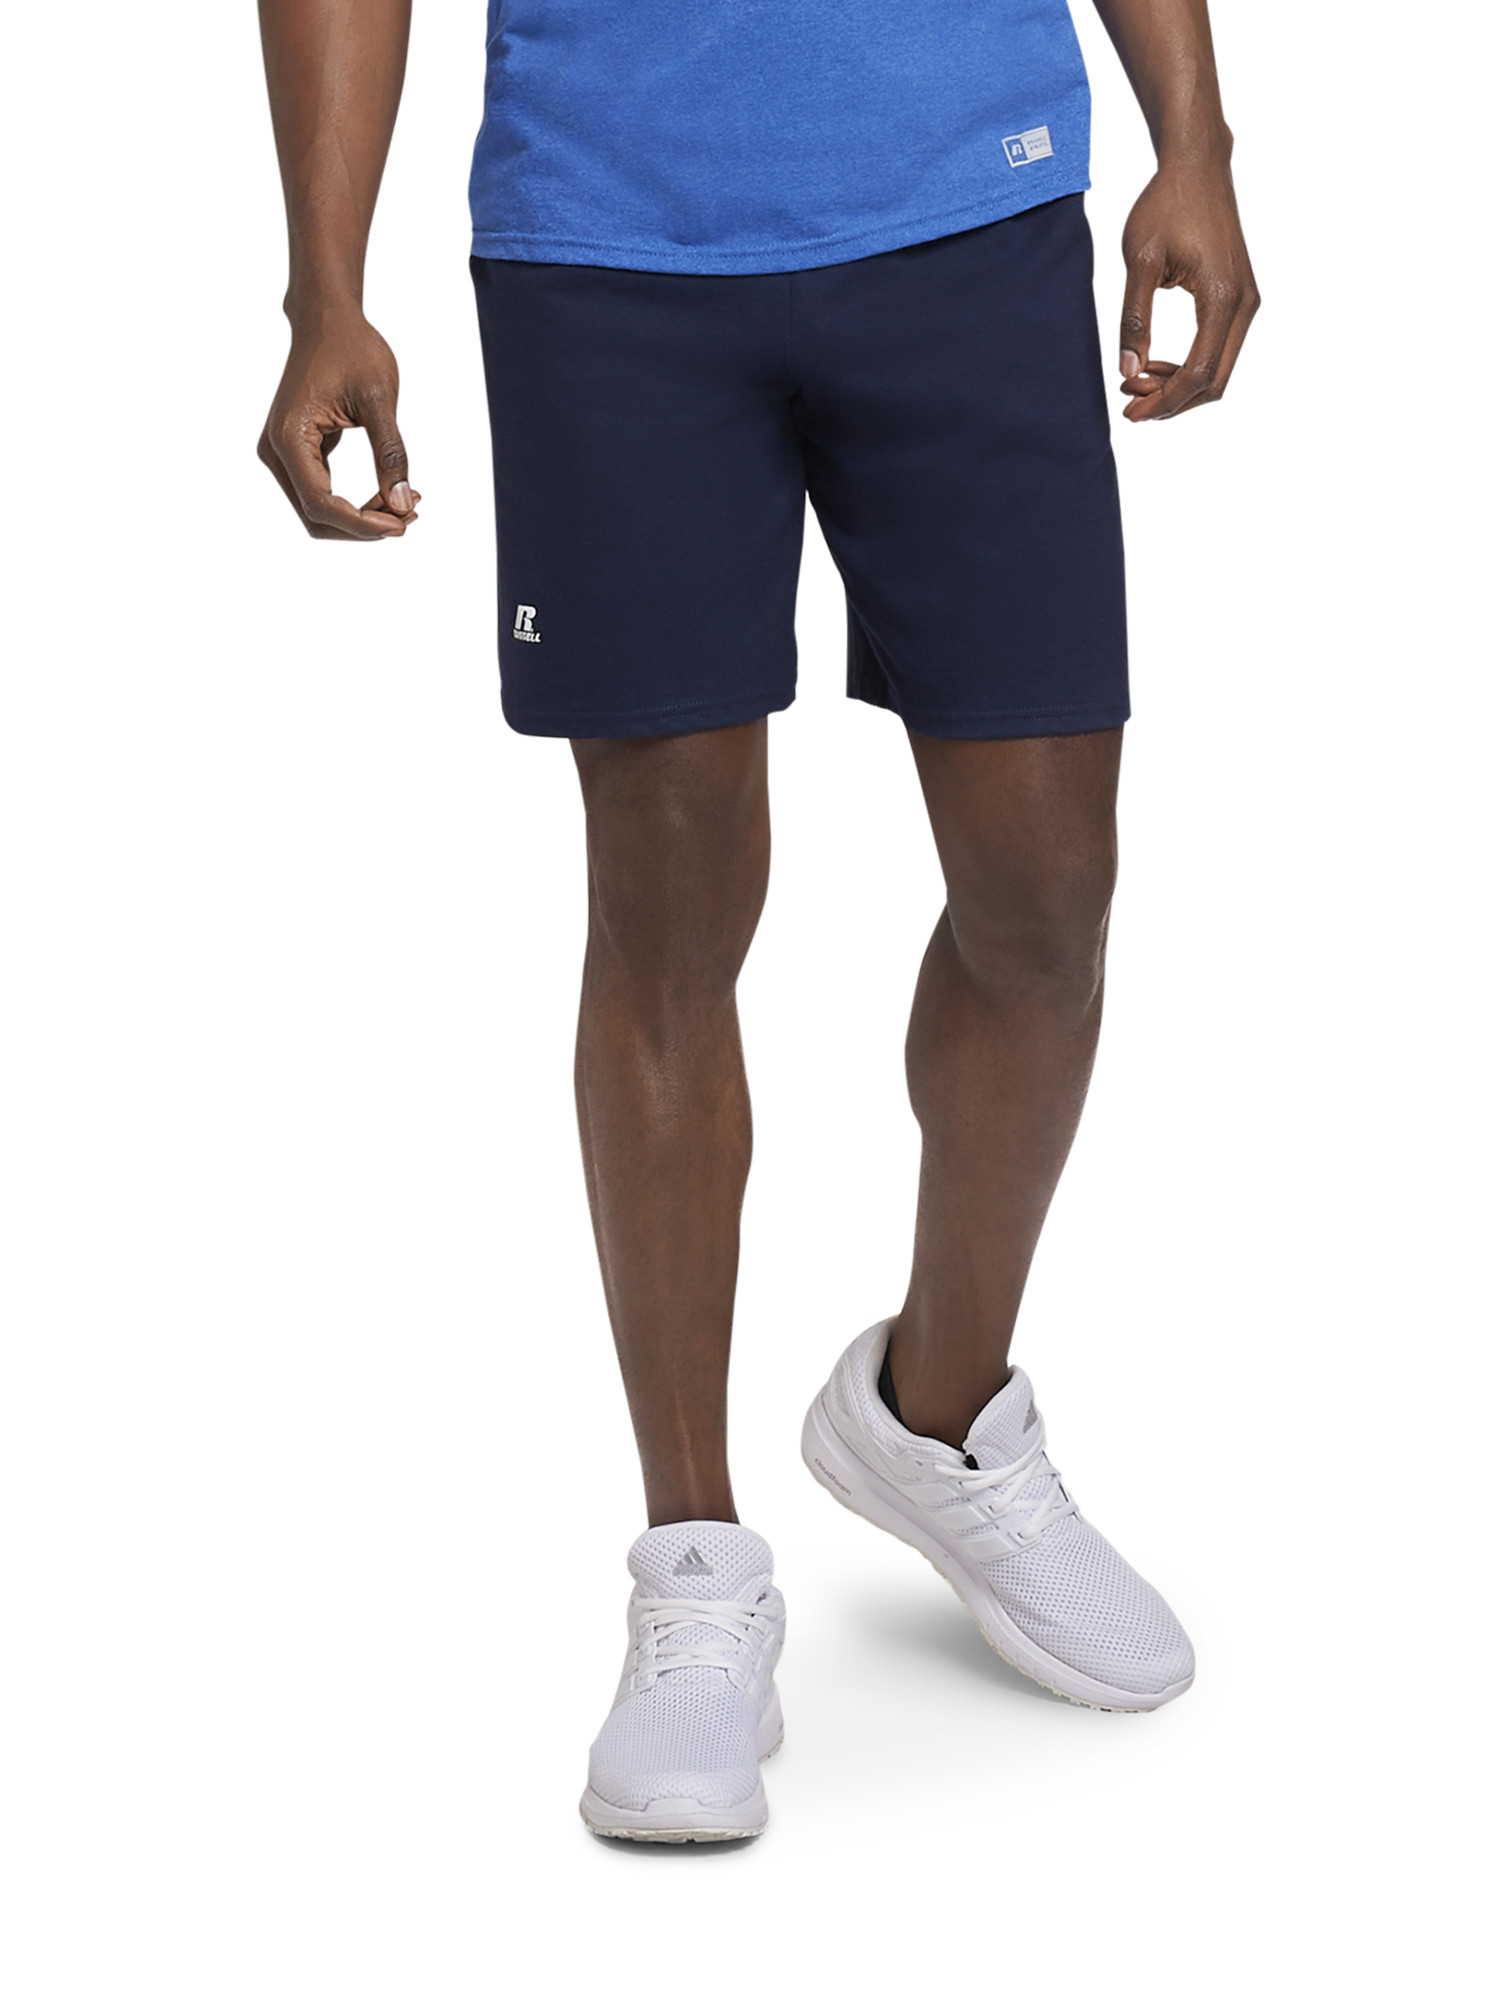 Russell Athletic Men's and Big Men's Basic Cotton Pocket Shorts - image 1 of 5